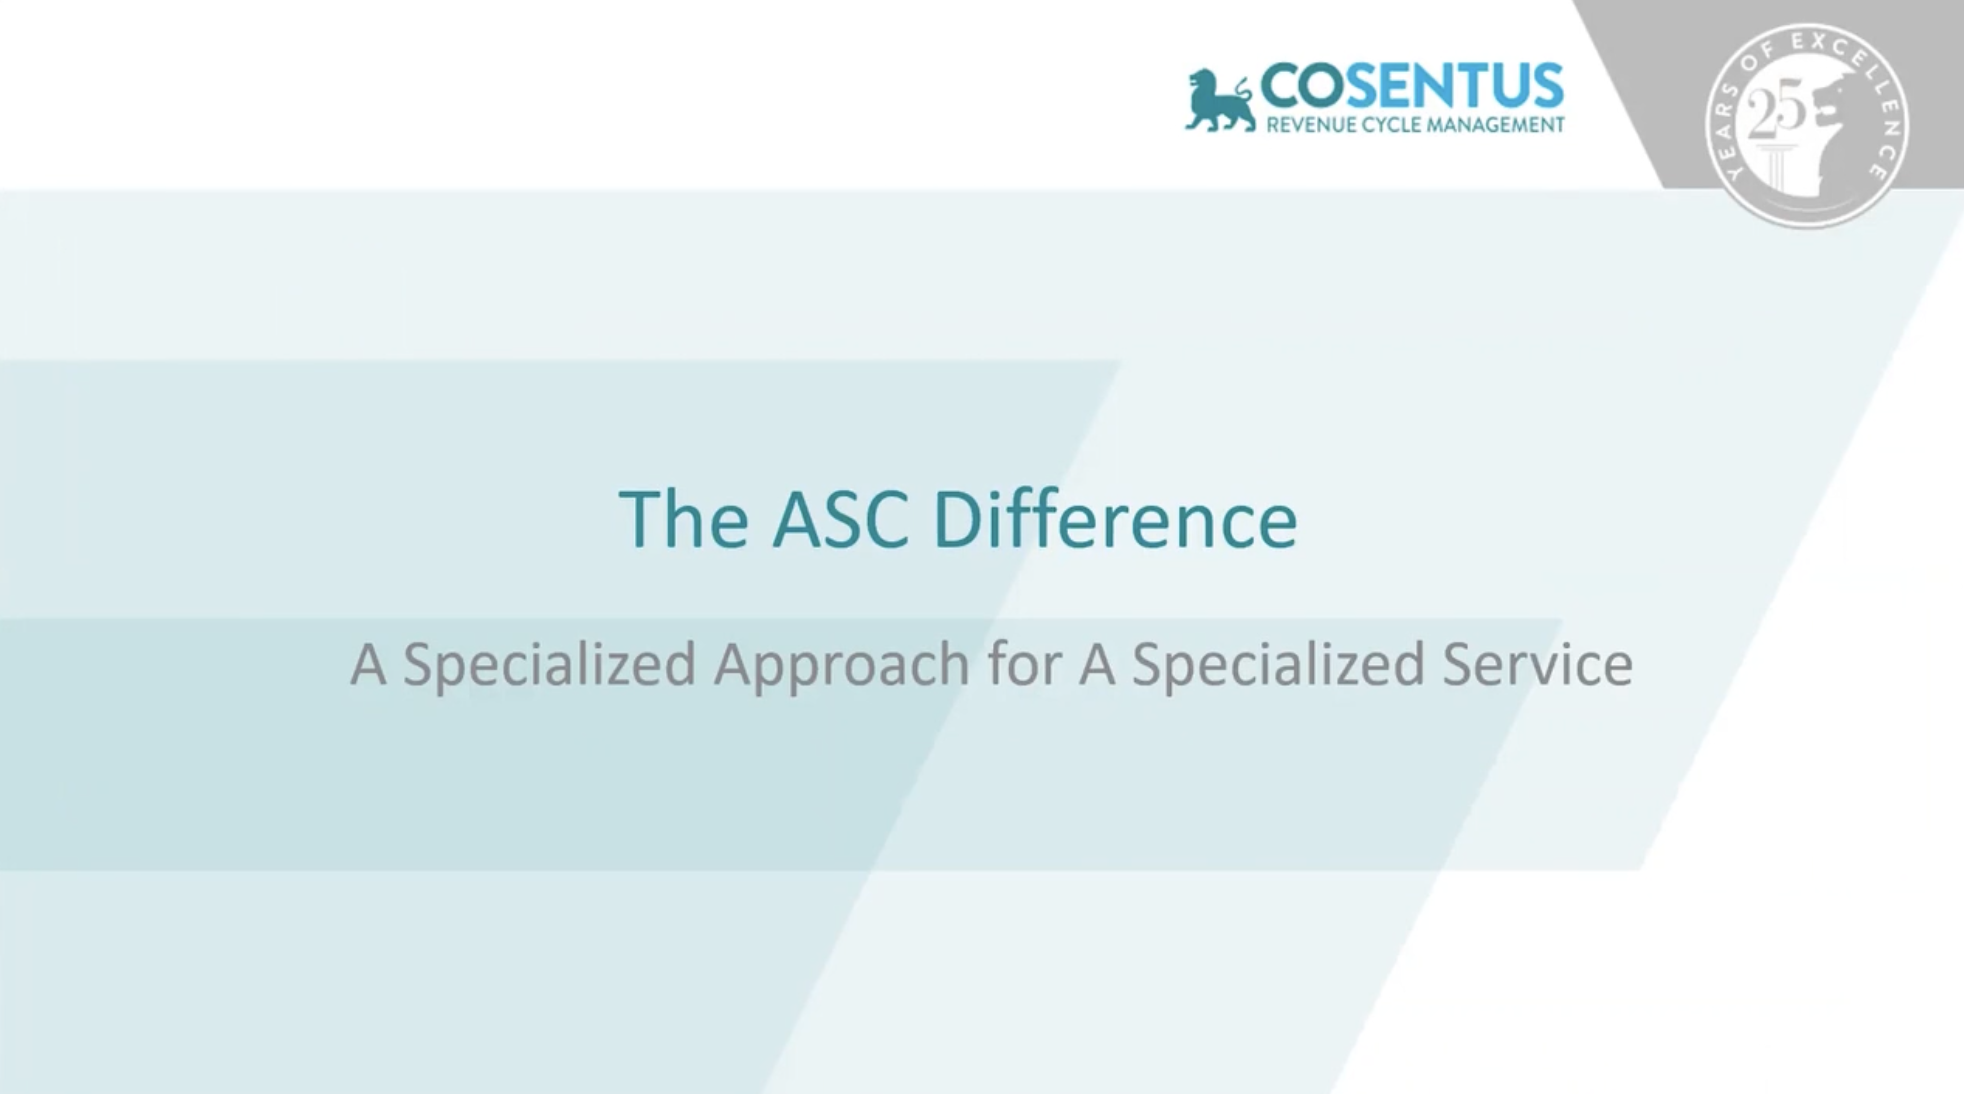 Webinar: NJAASC presents: The ASC Difference. A Specialized approach for a Specialized Service.